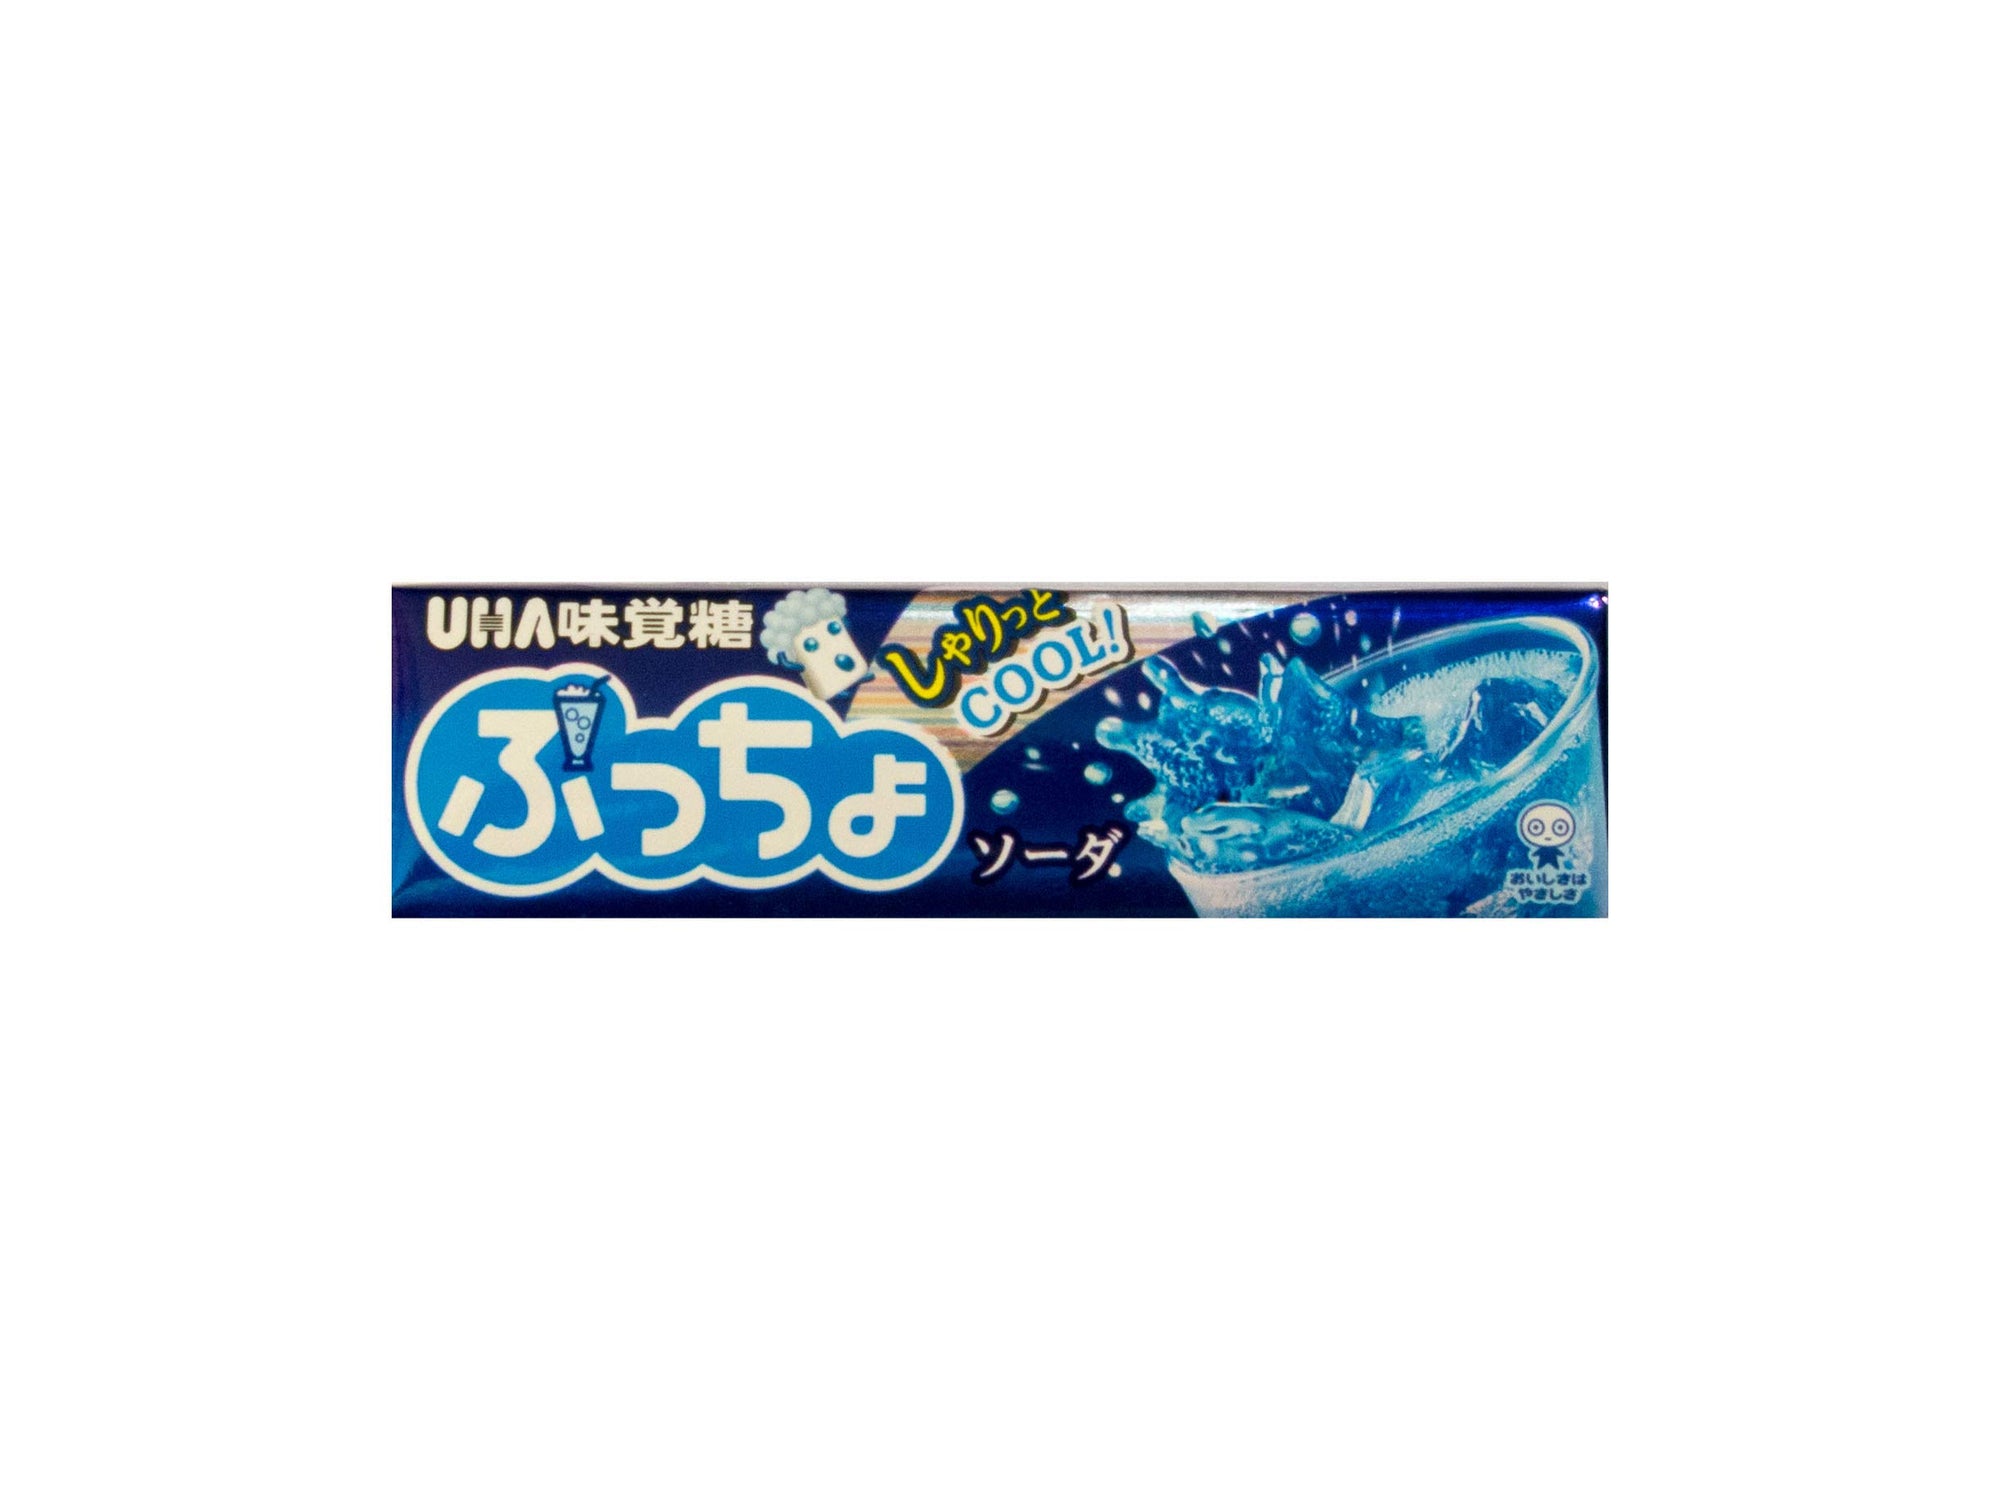 Soda Soft Chewy Taffy Candy with Soda Gummy & Fizzy Powder - Puccho - By Uha From Japan 10 Pcs